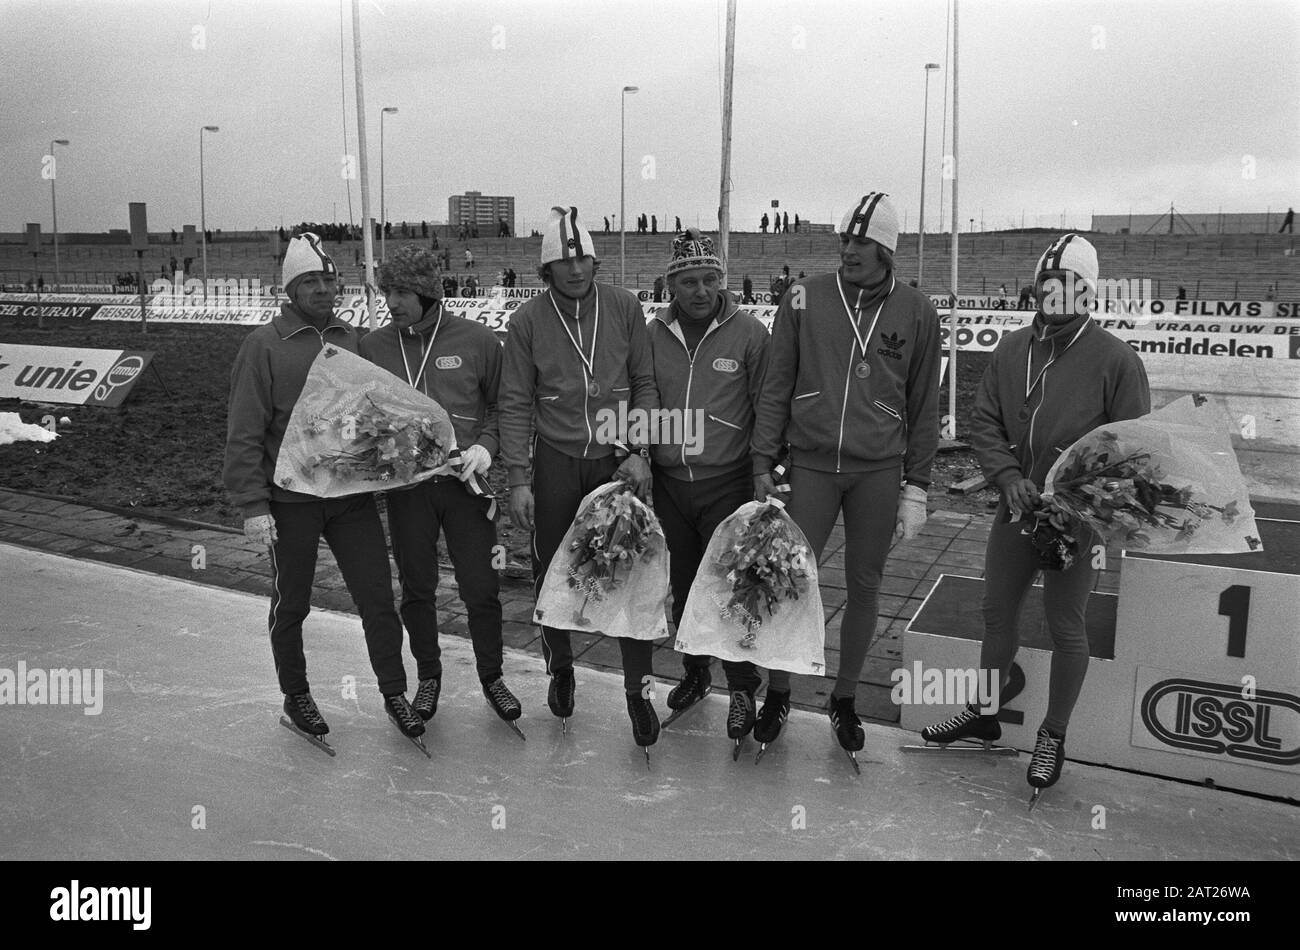 Competition for Silver Skating for professional skaters The Hague, 6 and 37  Verheijen, Verkerk, Valentijn, trainer Huiskes, Schenk and Bols Date: 24  February 1973 Location: The Hague, Zuid-Holland Keywords: skating, sport  Person